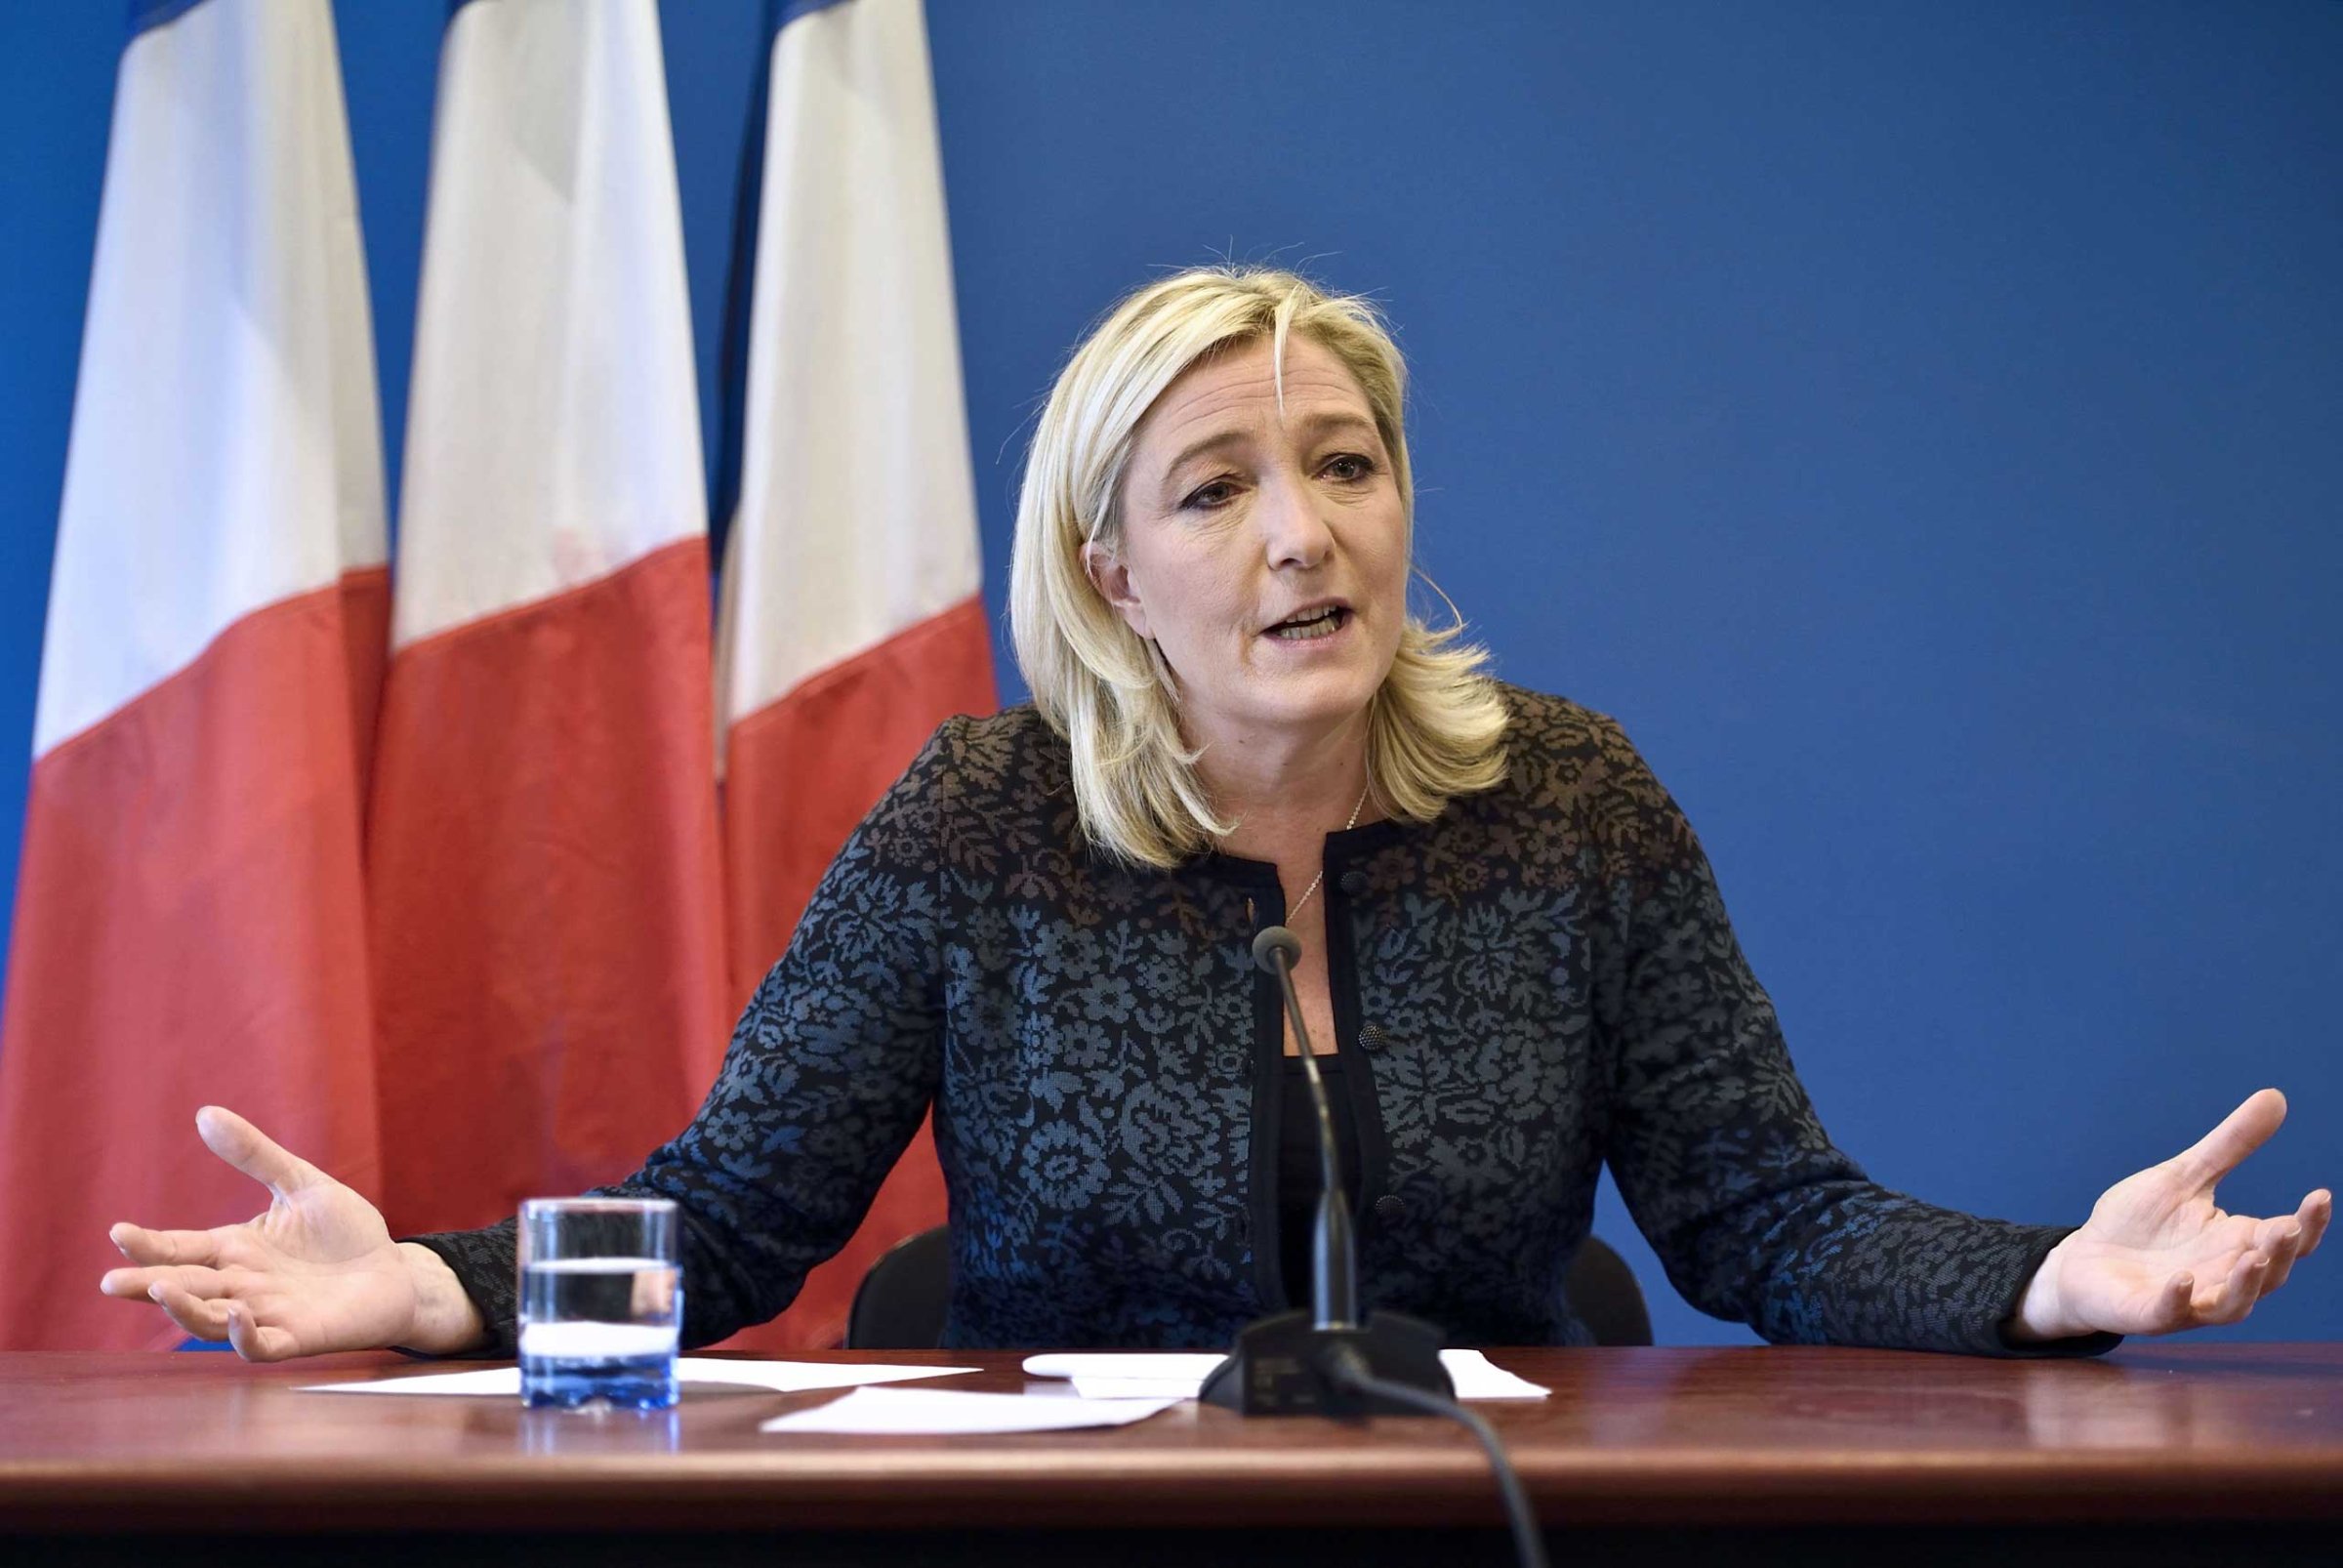 National Front president Marine Le Pen gives a press conference on Nov. 7, 2014 in Nanterre, near Paris.